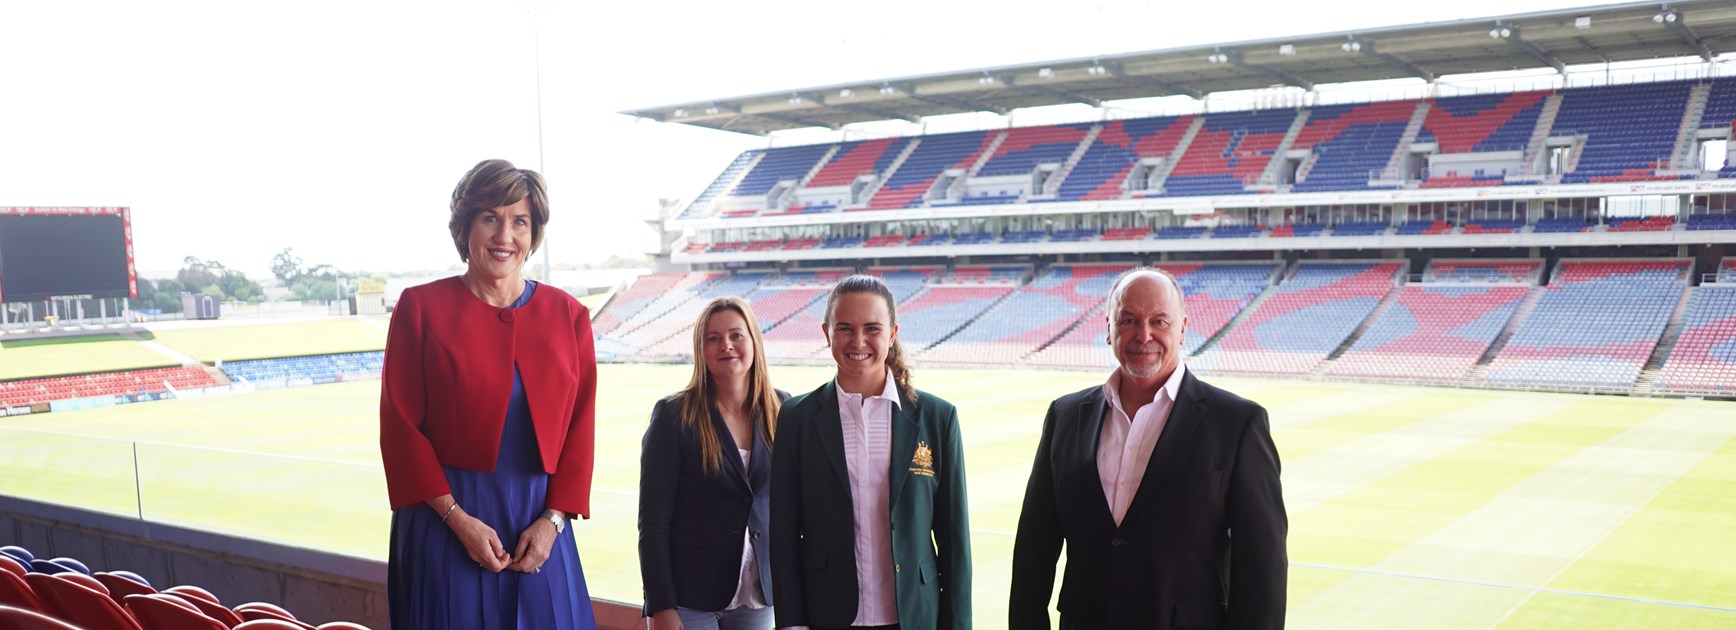 New scholarship supports women in sport